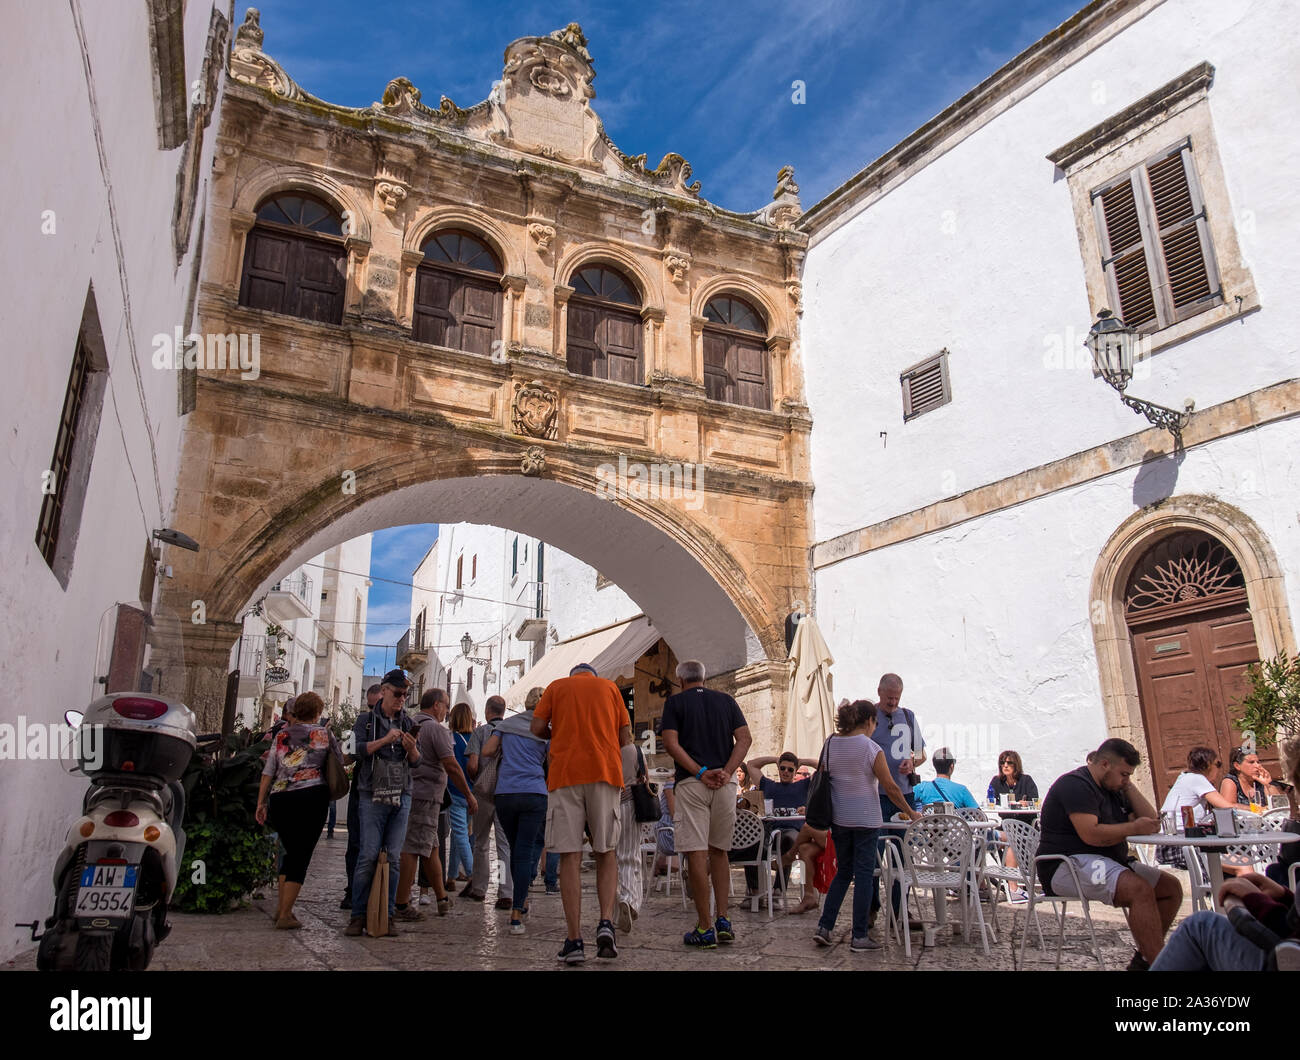 People wandering and enjoying the old town of Ostuni, Italy Stock Photo